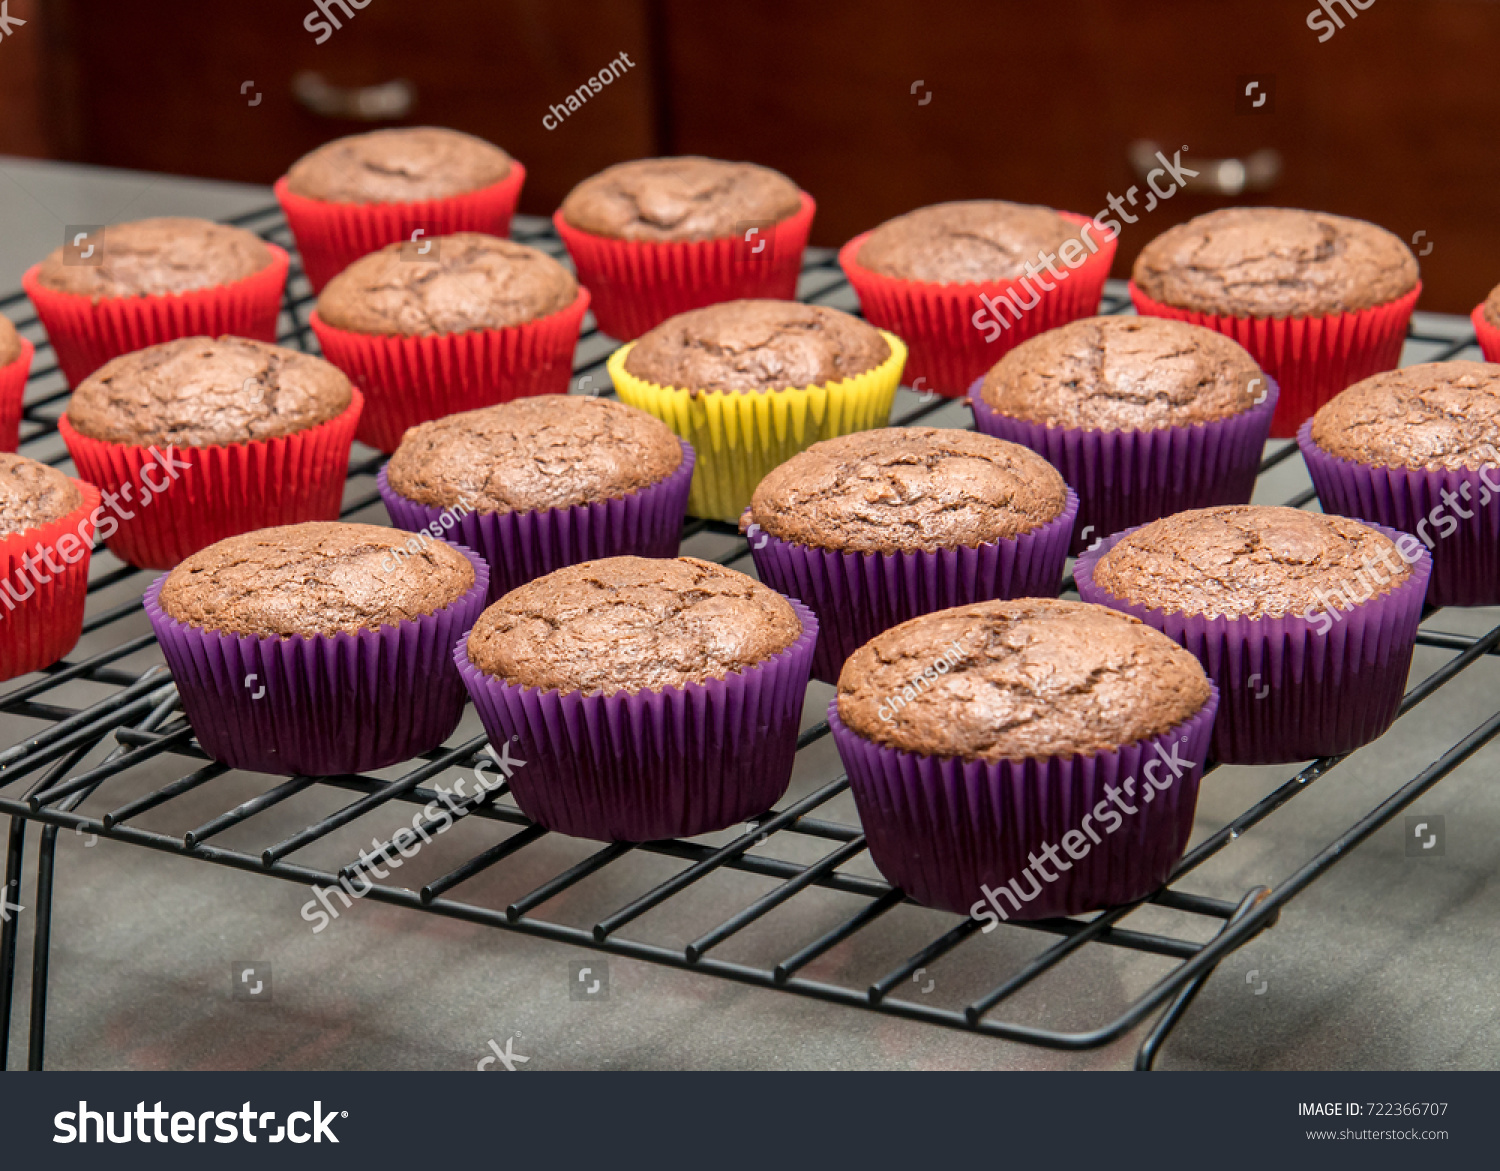 A group of cupcakes in vibrant paper wrappers cooling on a wire  #722366707